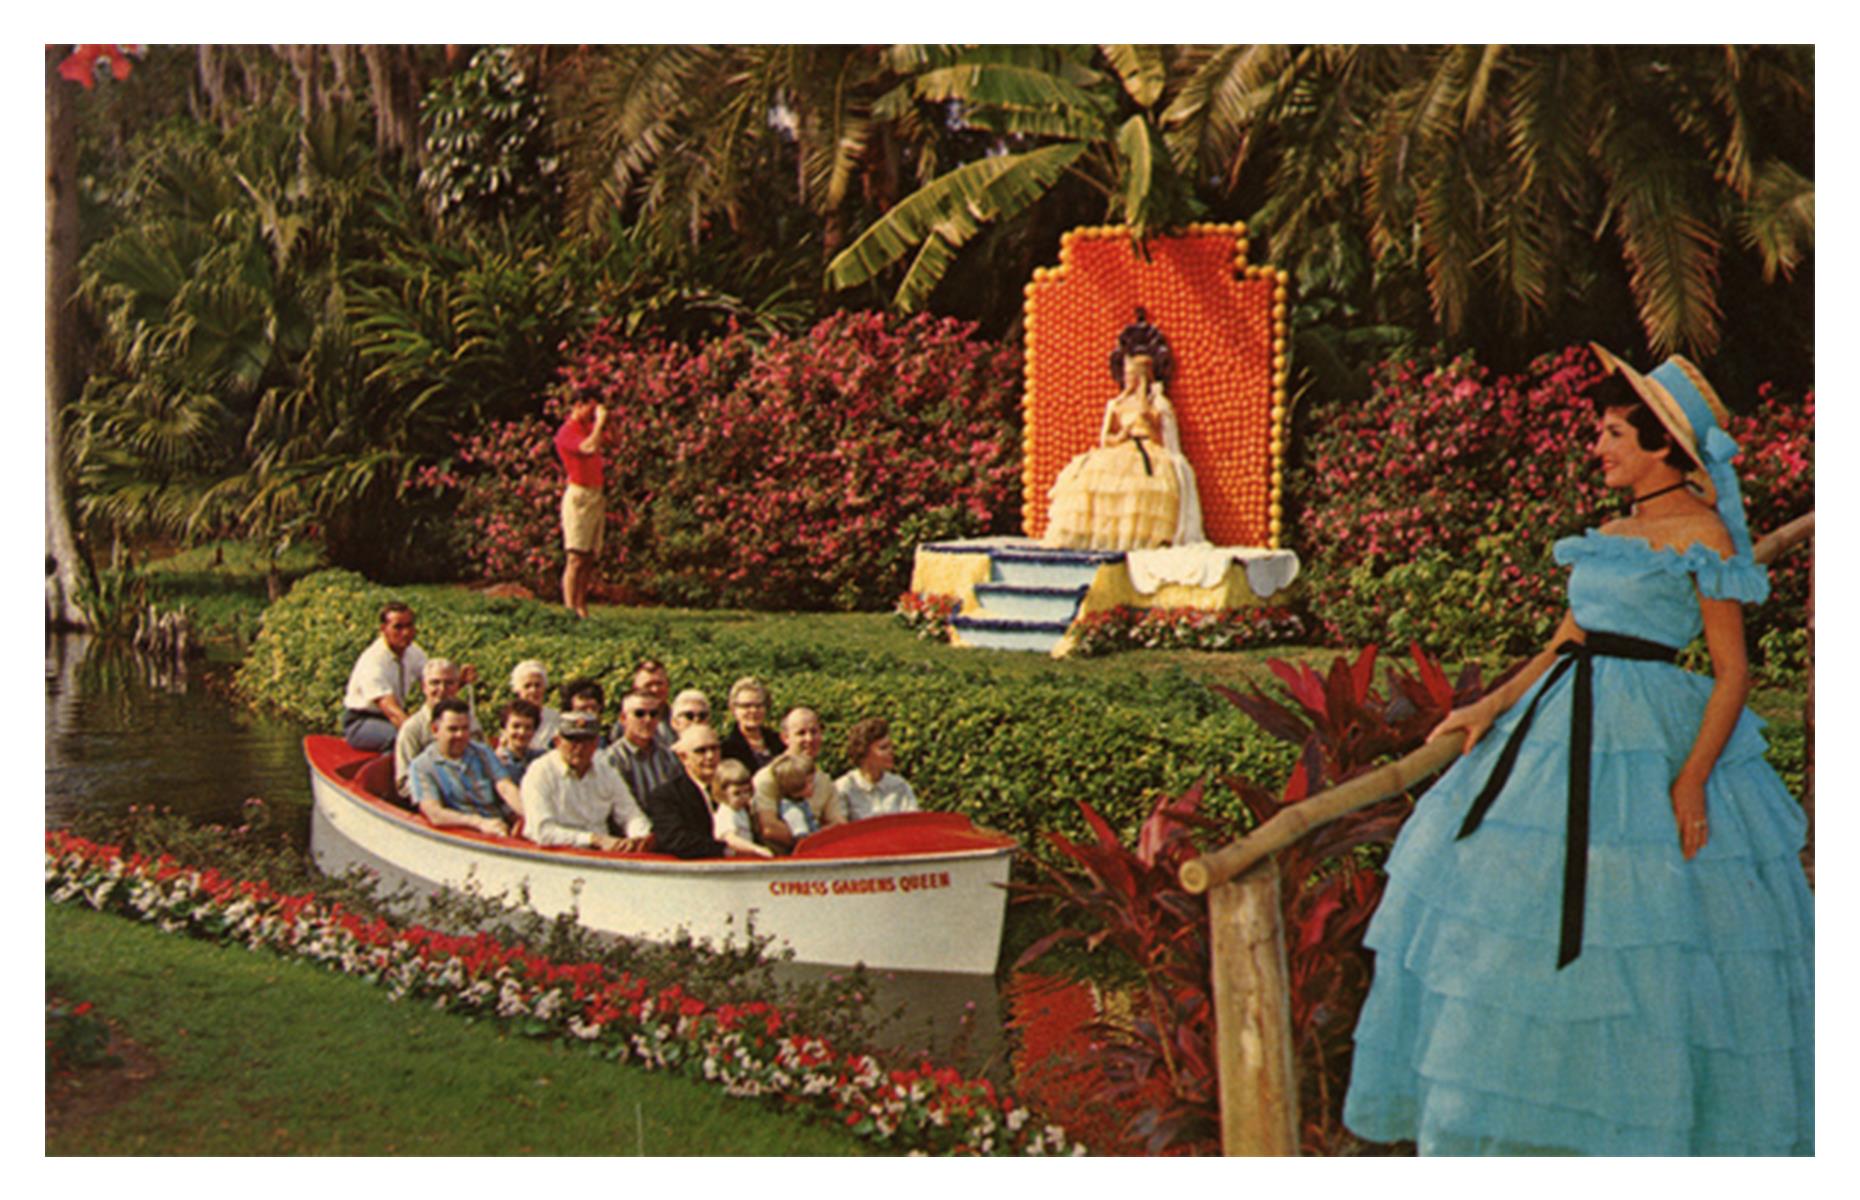 Another draw for tourists to the Sunshine State was Winter Haven's Cypress Gardens. Often tipped as Florida's first major tourist attraction, the site was a theme park and botanical garden that opened in 1936. In this 1940s photo, visitors take a boat ride along the plant-fringed canals, which were punctuated with "Southern Belles": women dressed in colorful crinoline dresses.